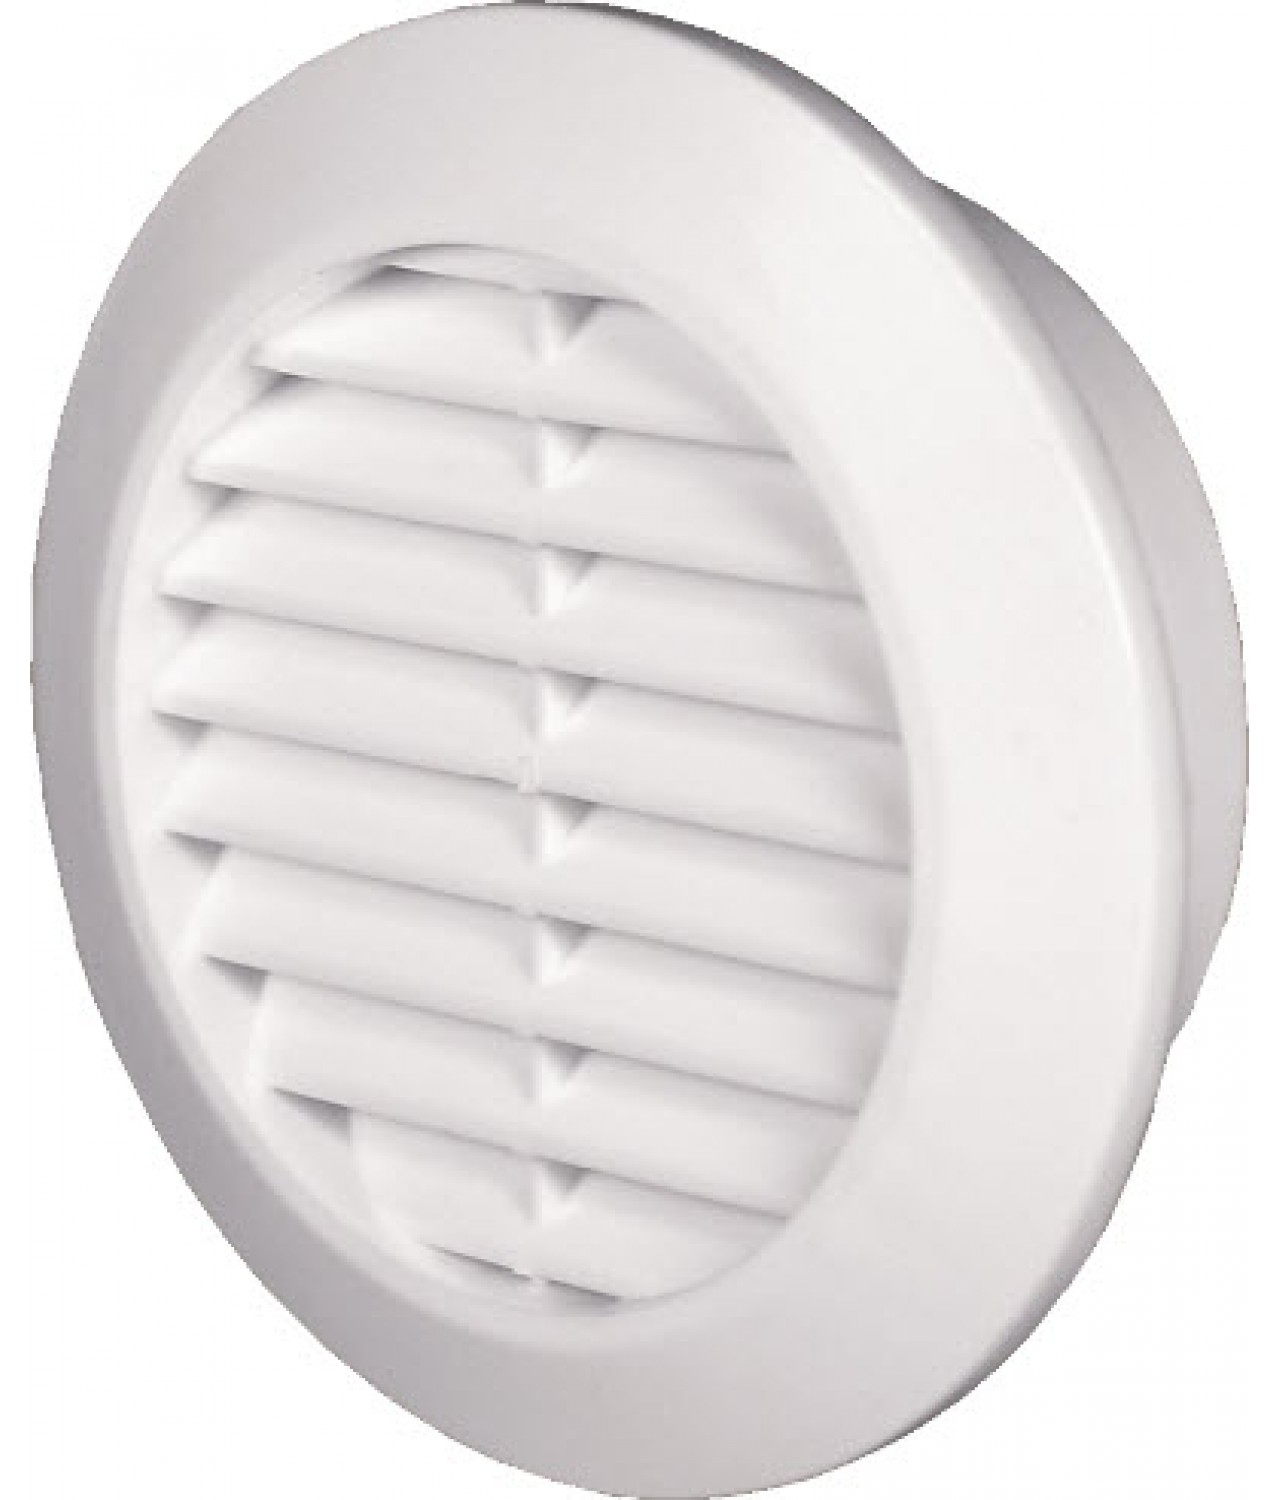 Air vent cover GRT75, Ø70/95 mm - white